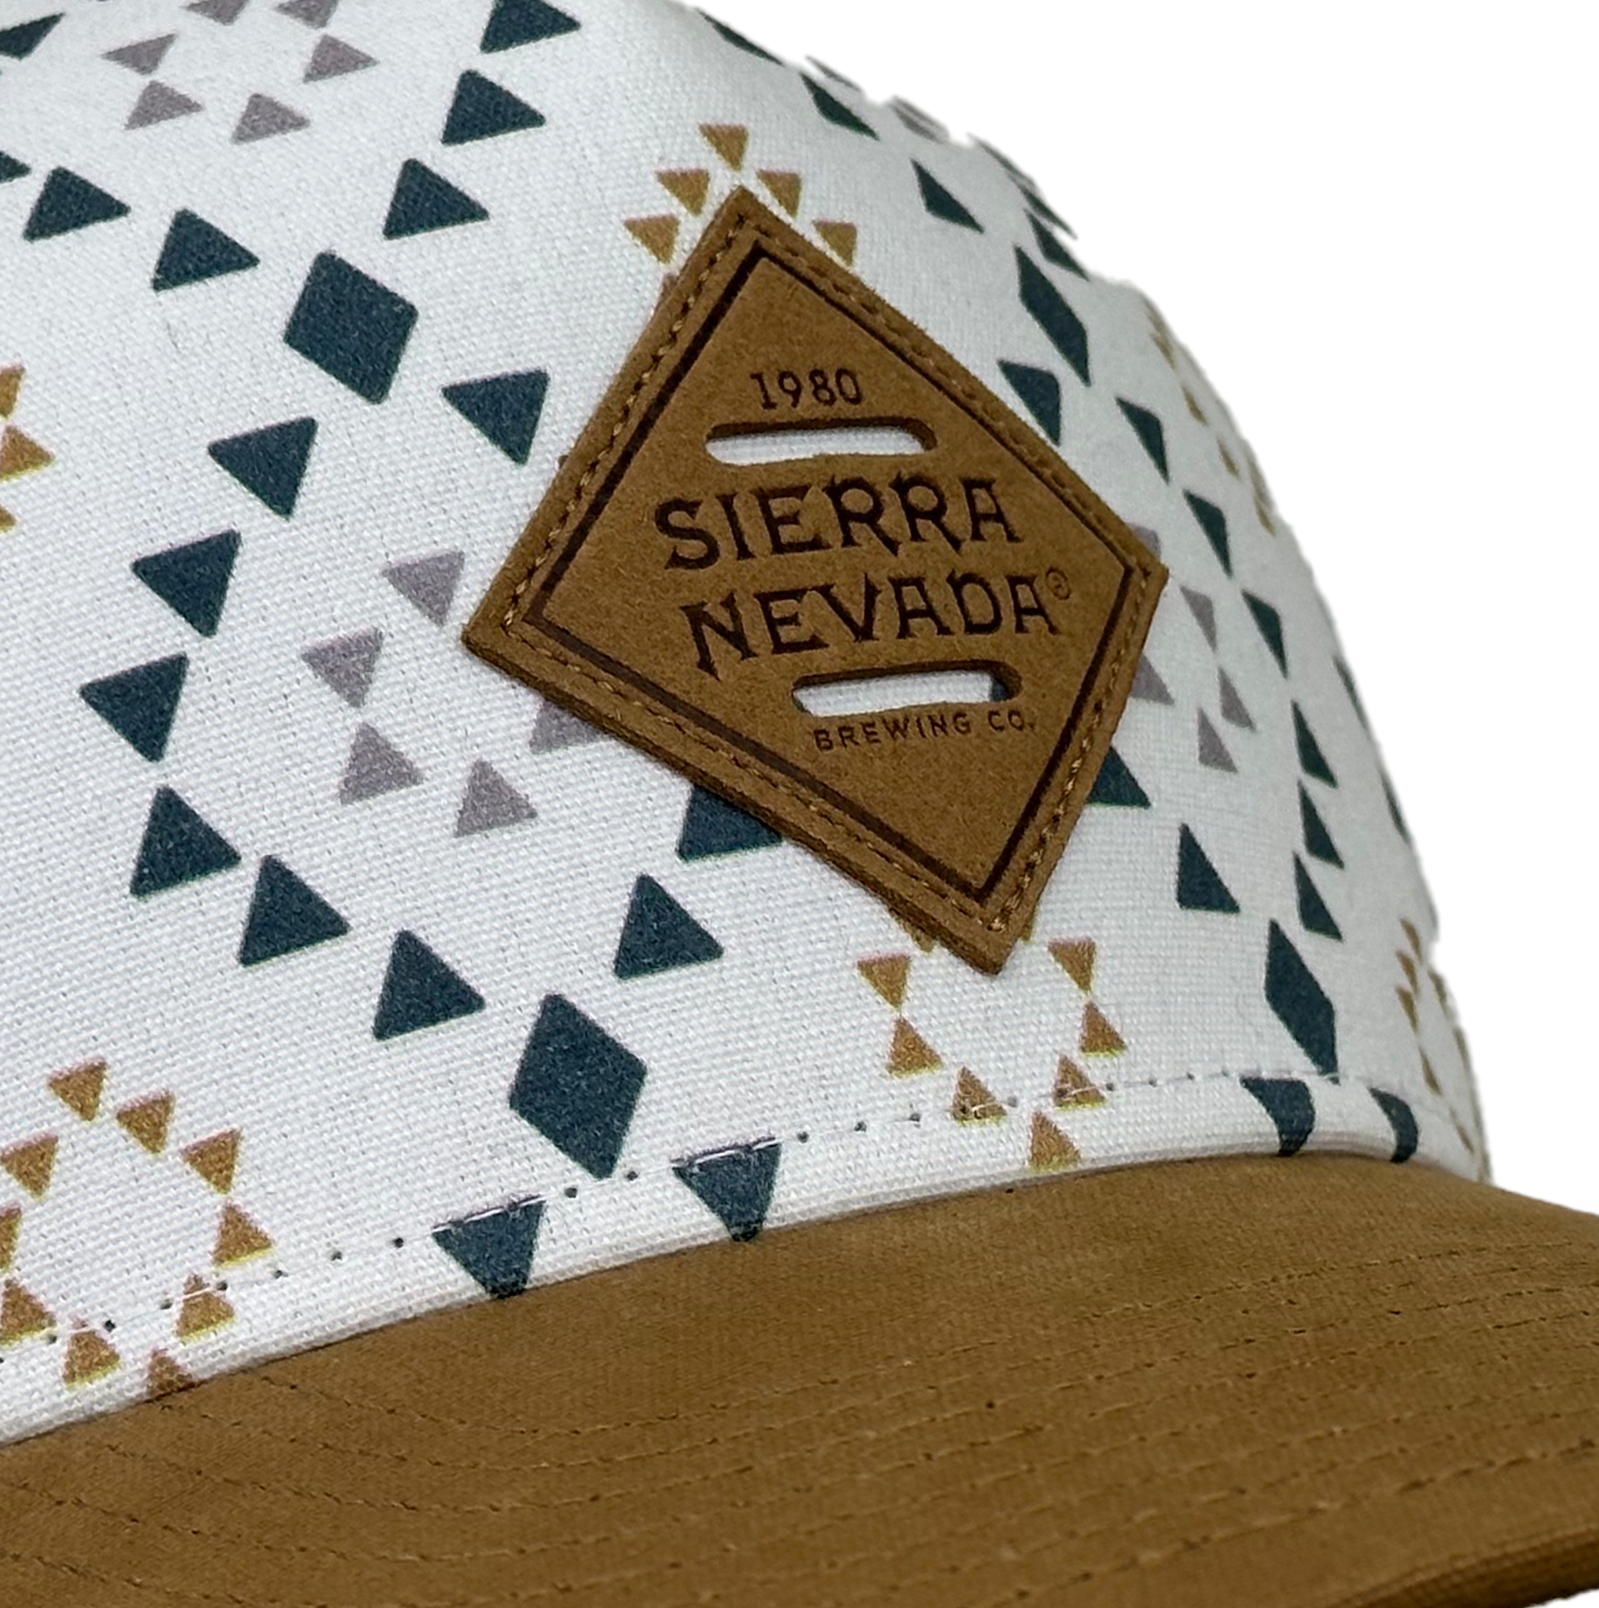 Sierra Nevada Brewing Co. Hop Spring Trucker Hat - close up view of the leather Sierra Nevada patch on the front of the hat and geometric print background